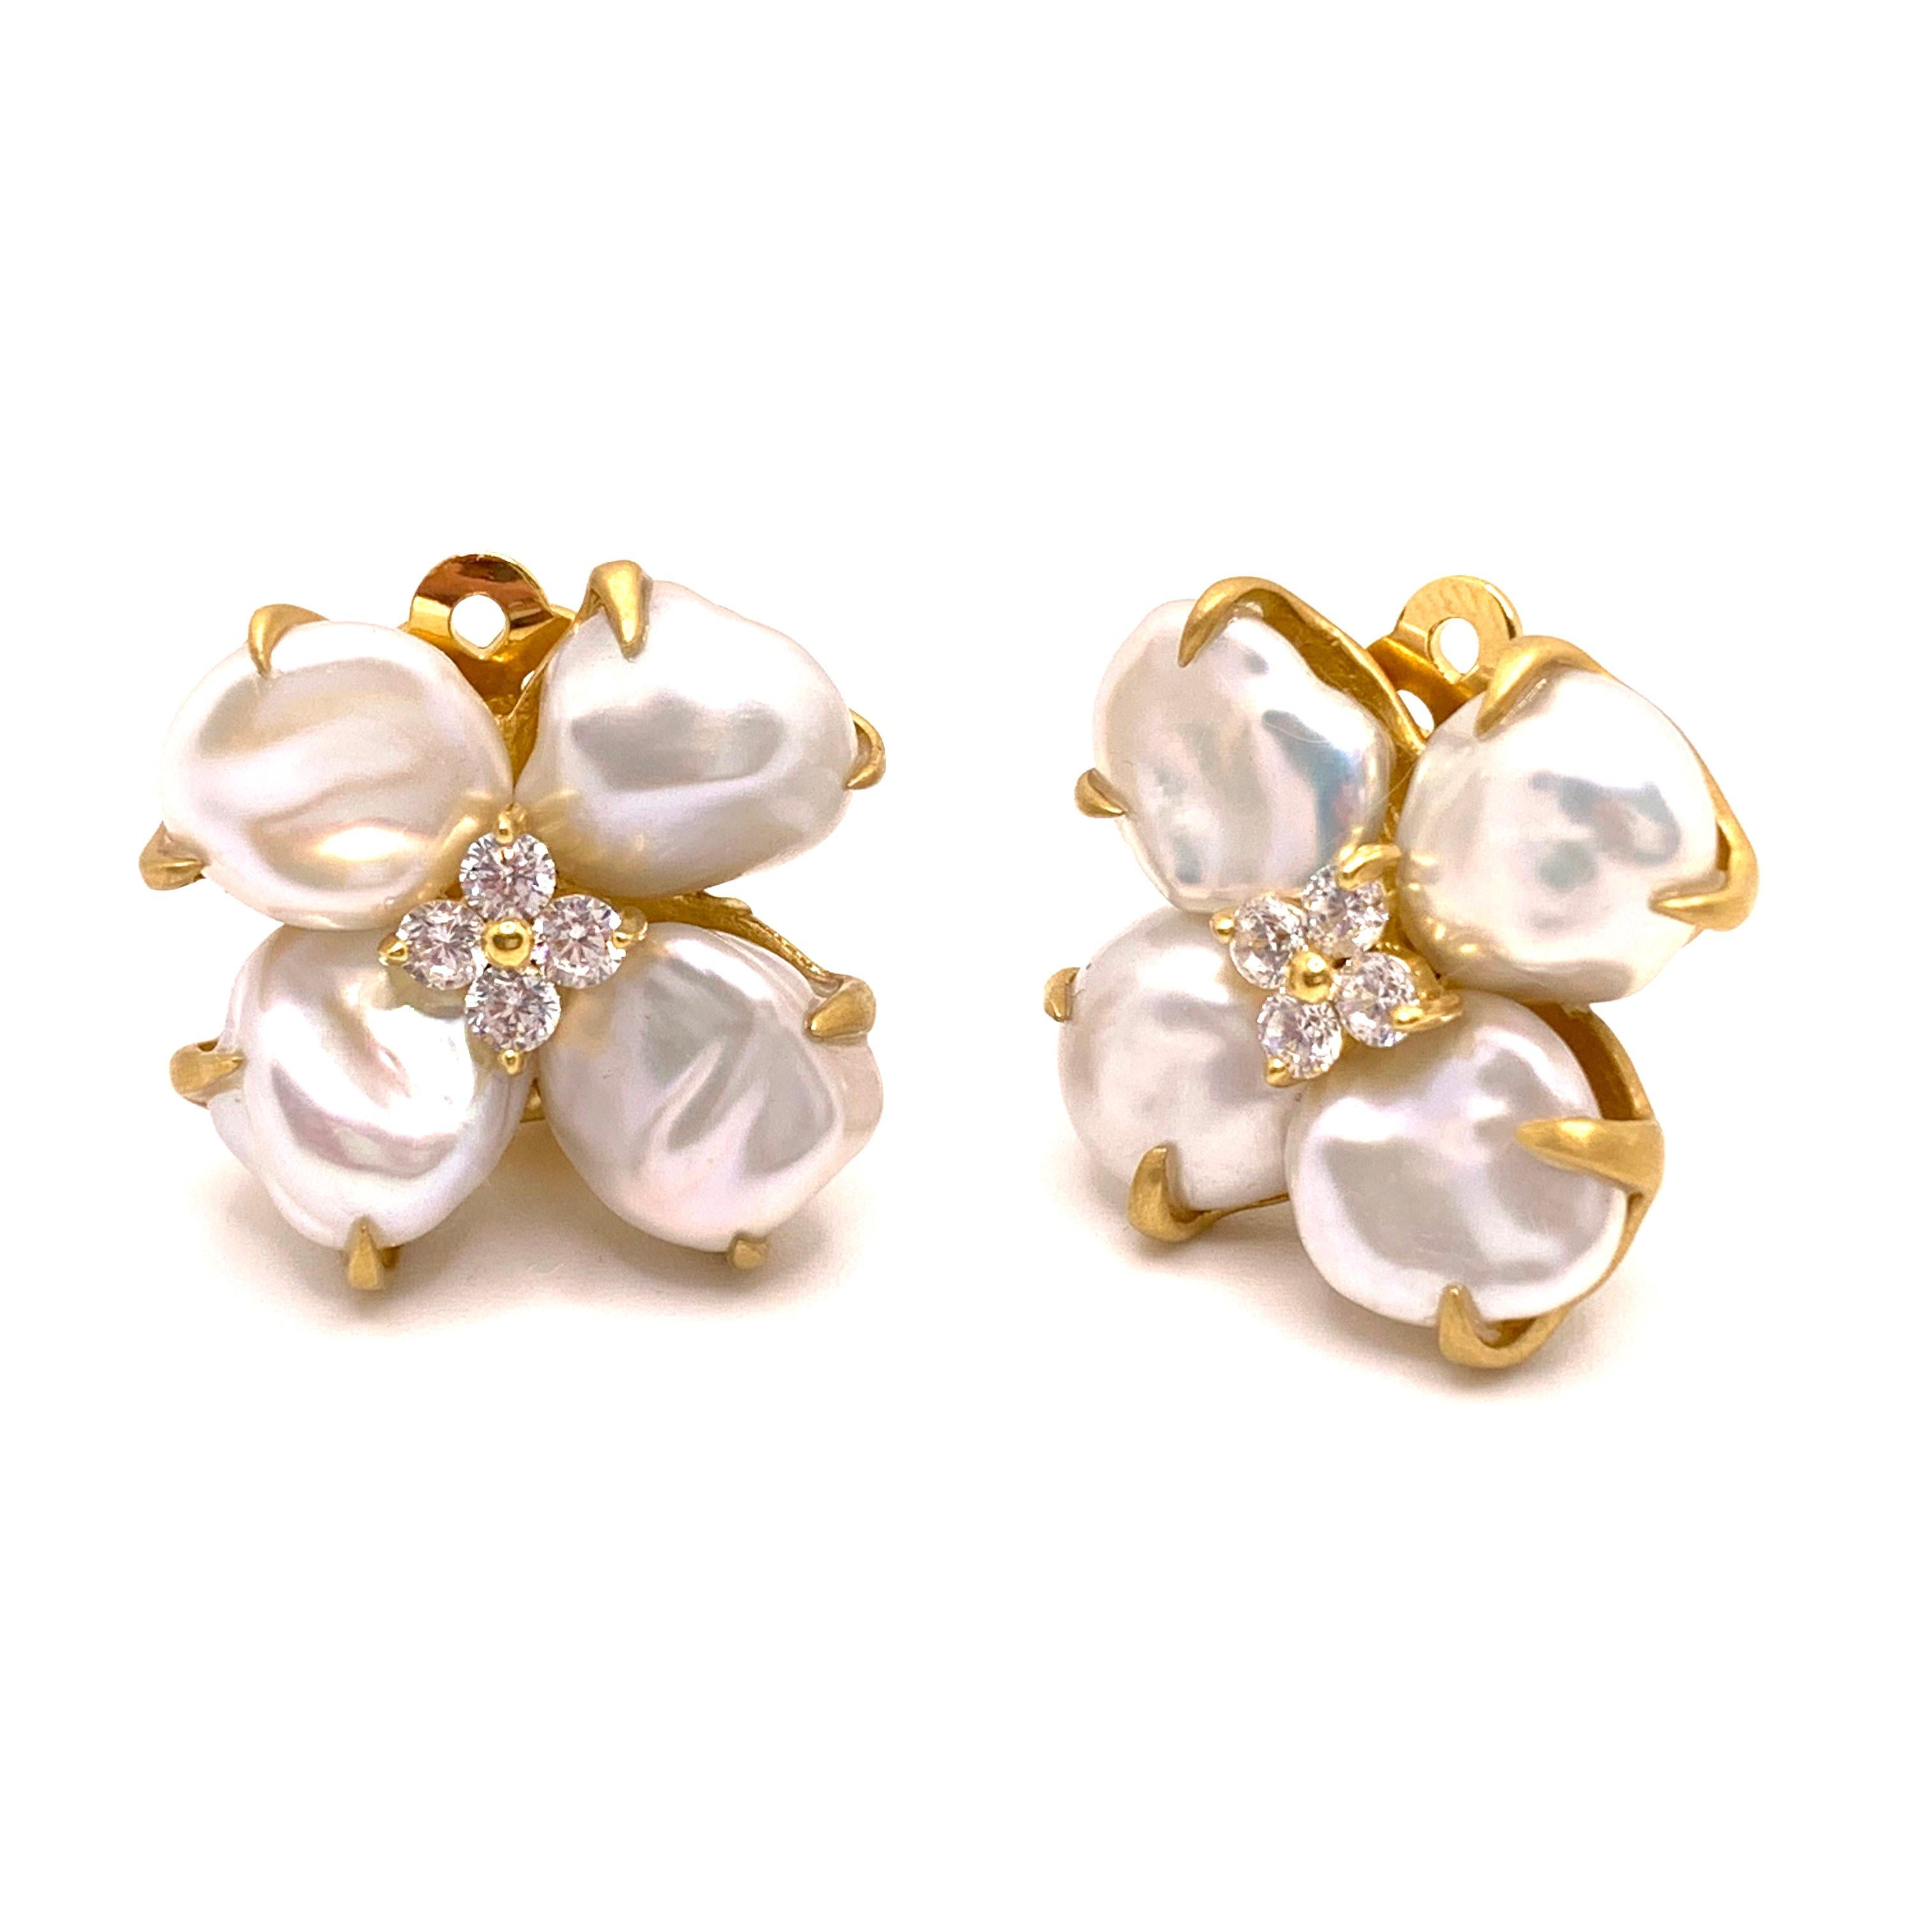 4-petal Keishi Pearl Blossom Flower Clip-on Earrings

These beautiful flower earrings features lustrous cultured Japanese Keishi pearls as petal adorned with round simulated diamonds, handset in 18k yellow gold vermeil over sterling silver, and